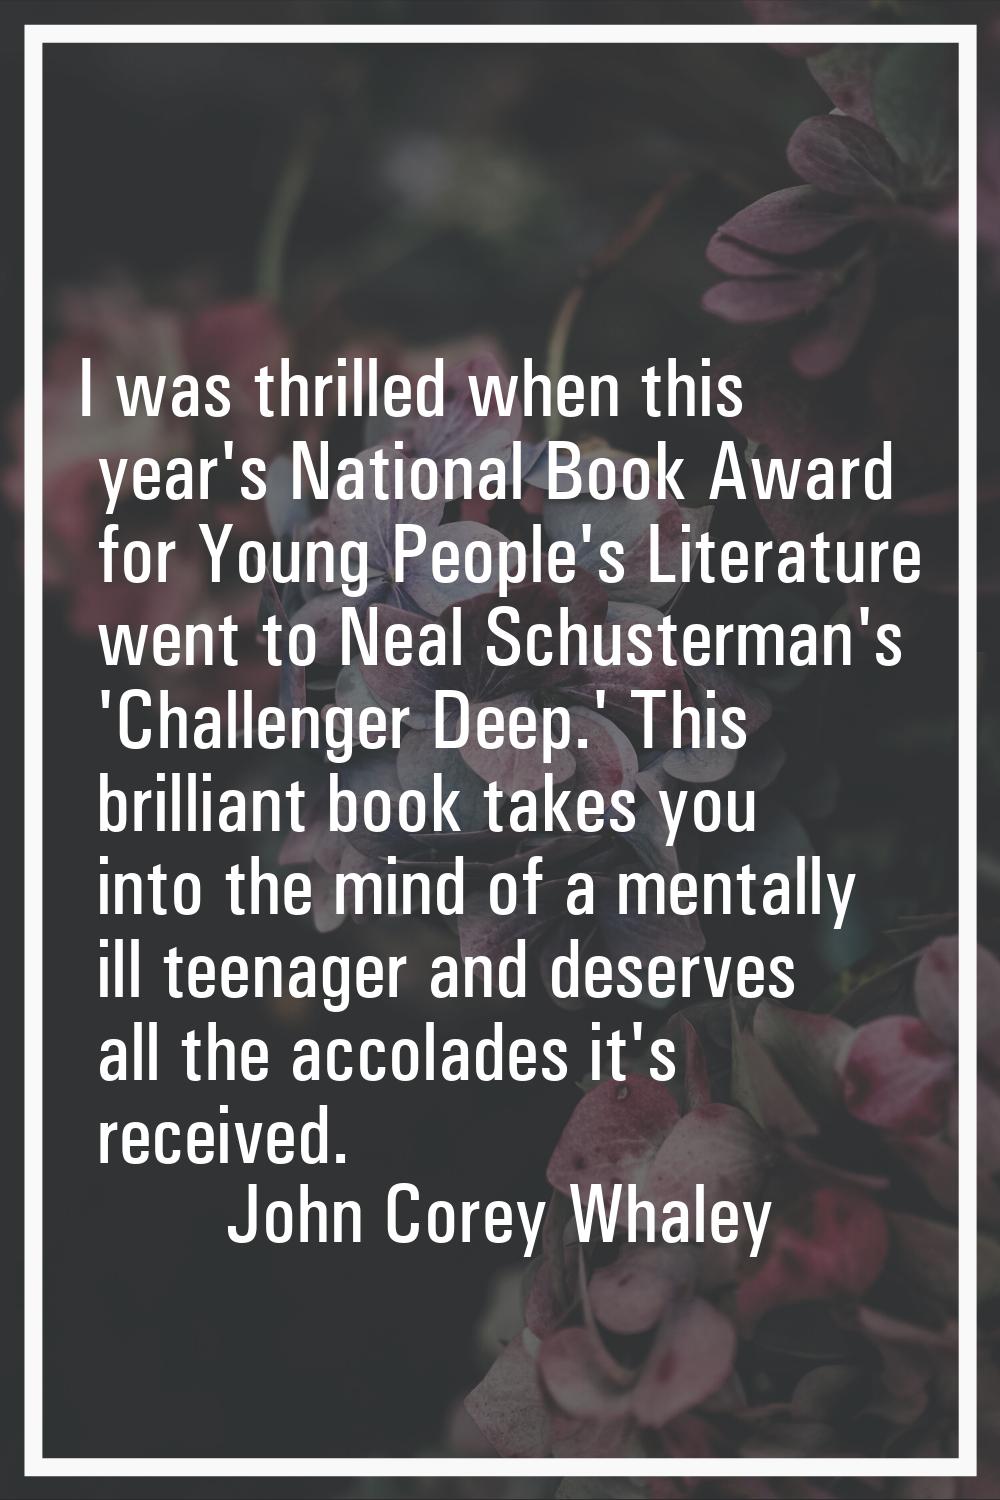 I was thrilled when this year's National Book Award for Young People's Literature went to Neal Schu